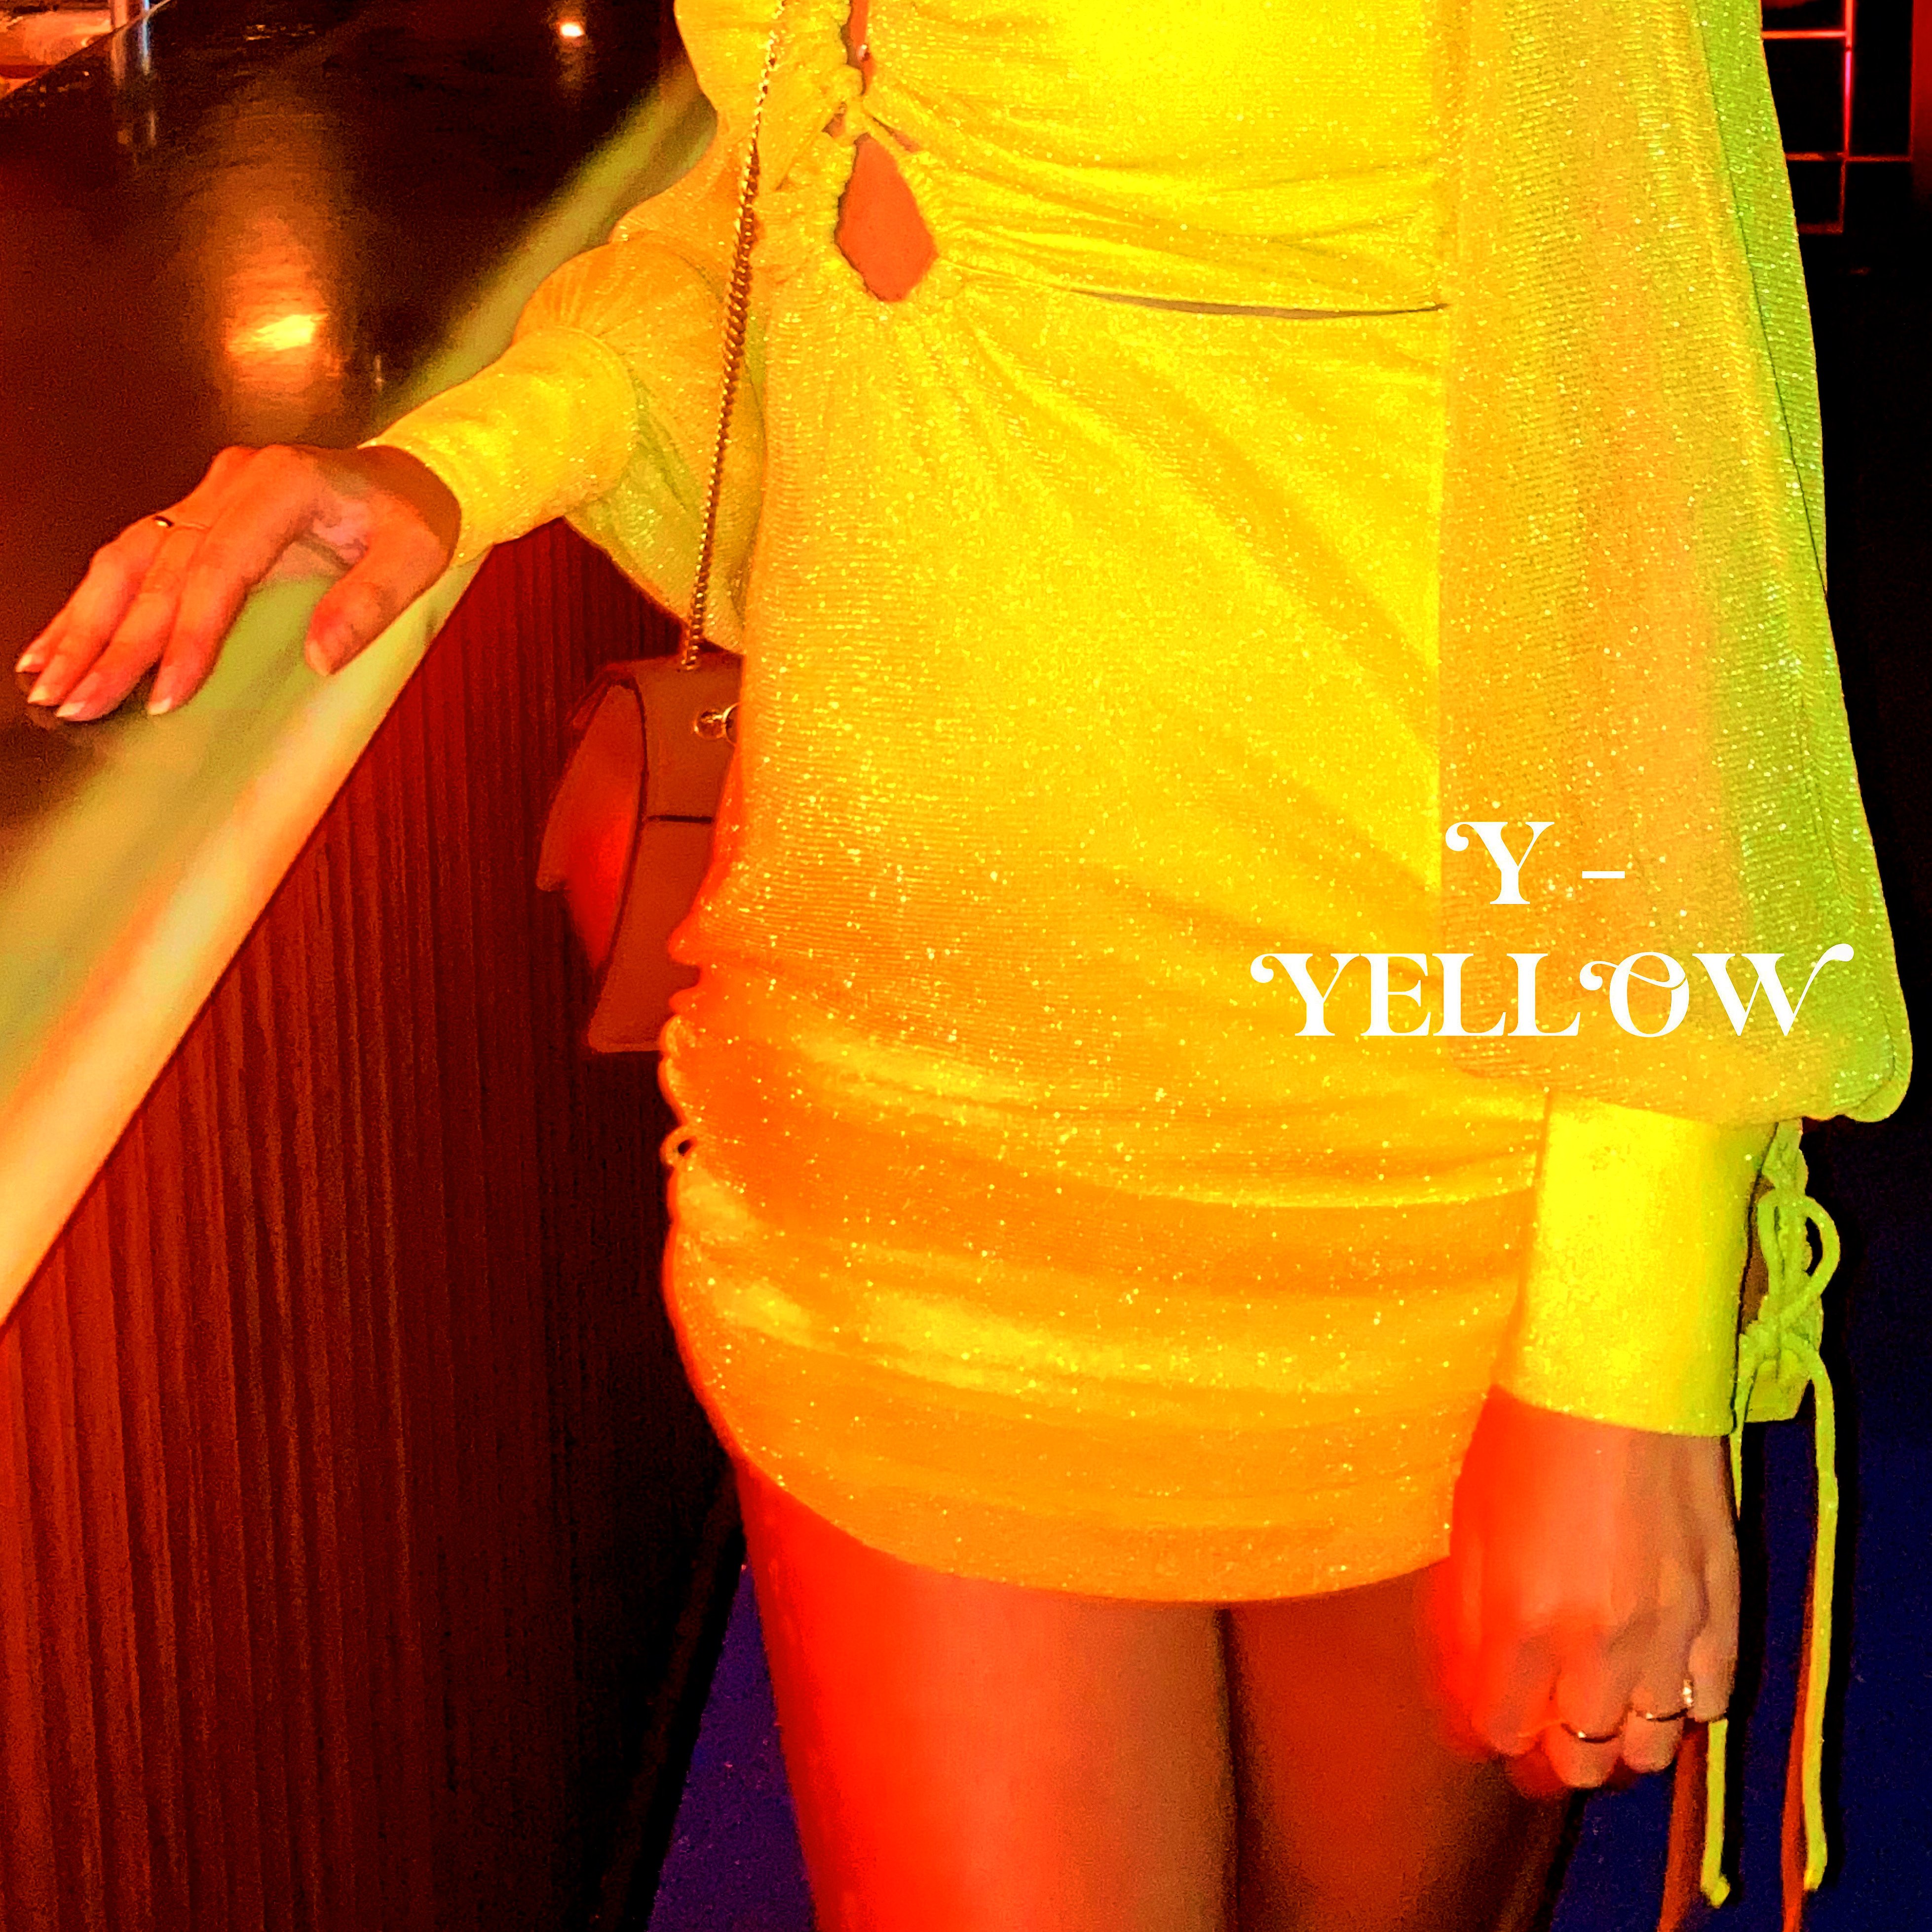 Y - YELLOW